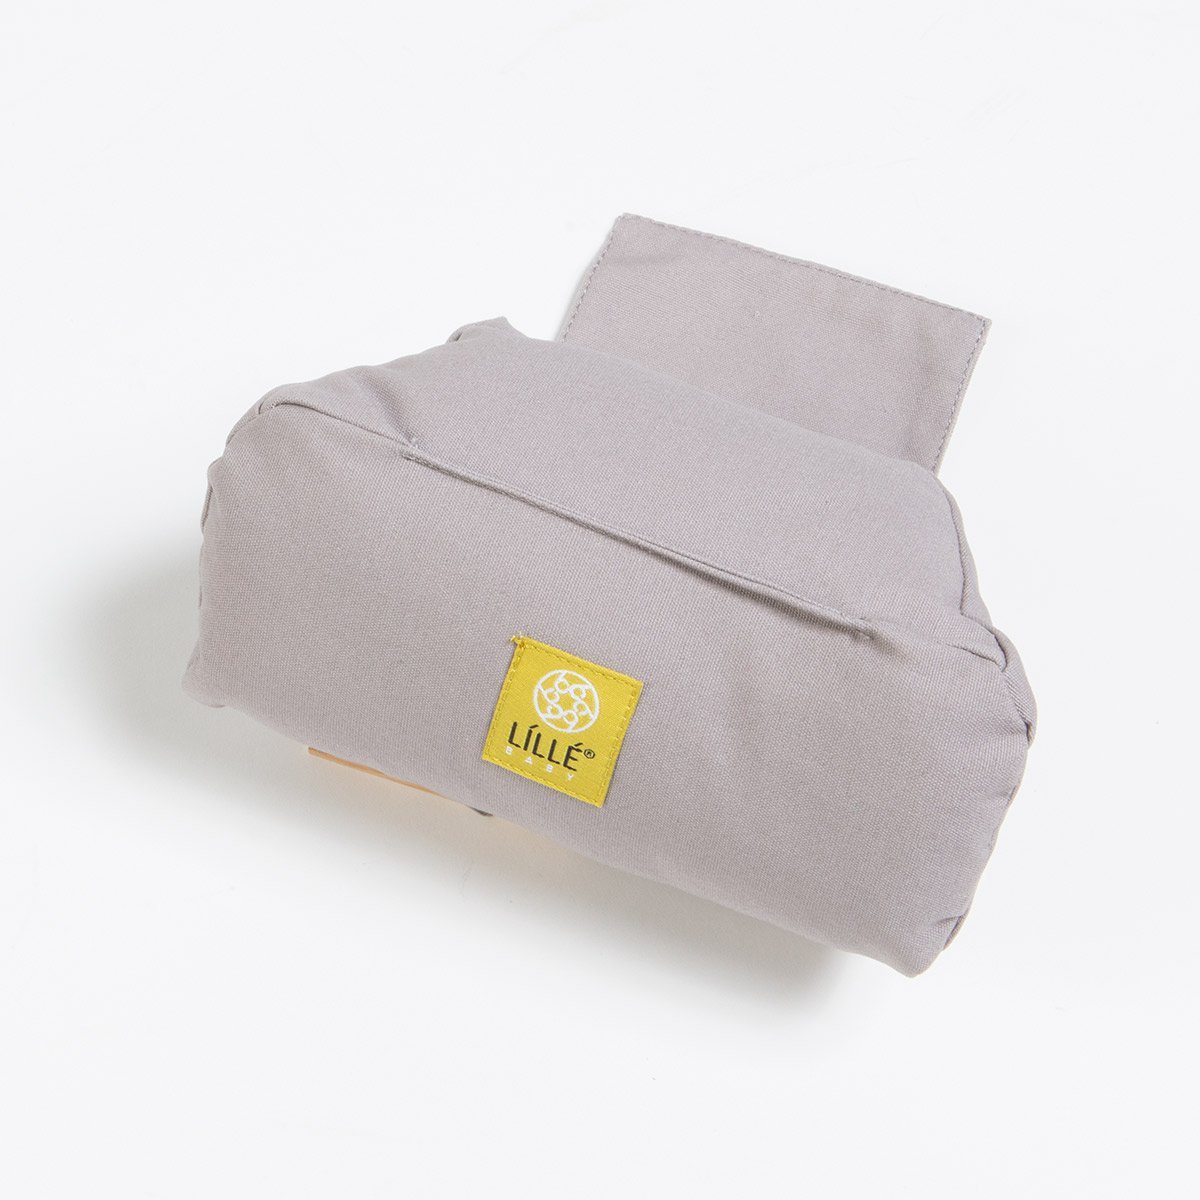 lillebaby infant pillow in gray color